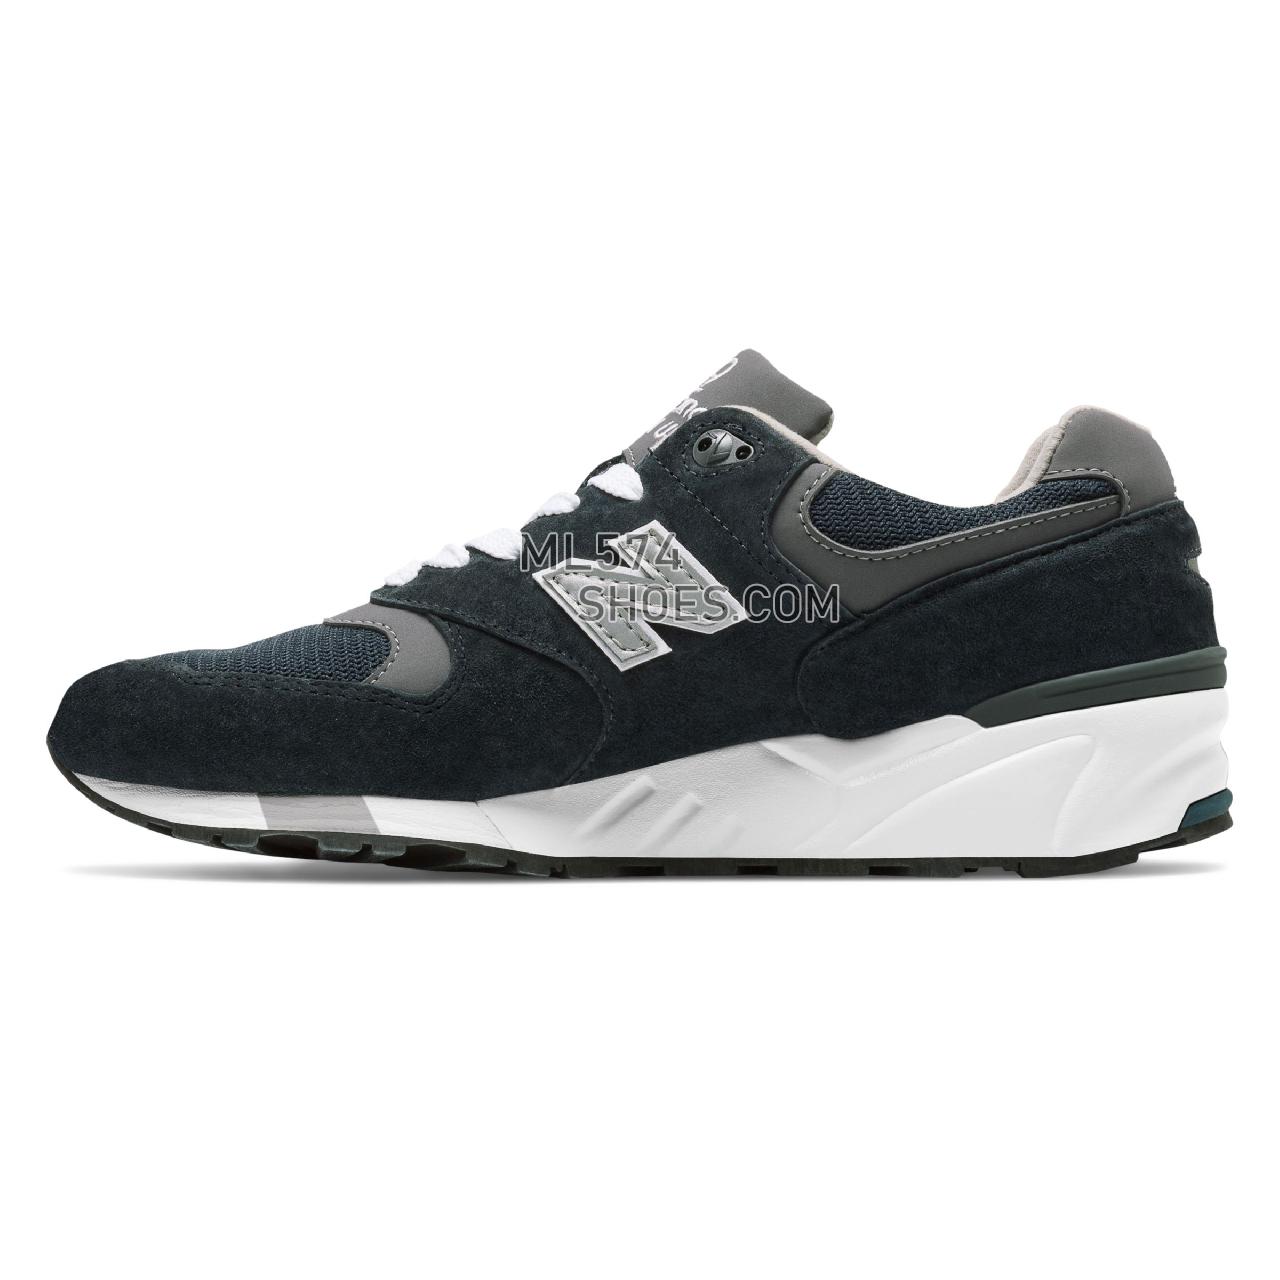 New Balance Made in US 999 - Men's 999 - Classic Navy with Pewter - M999CBL